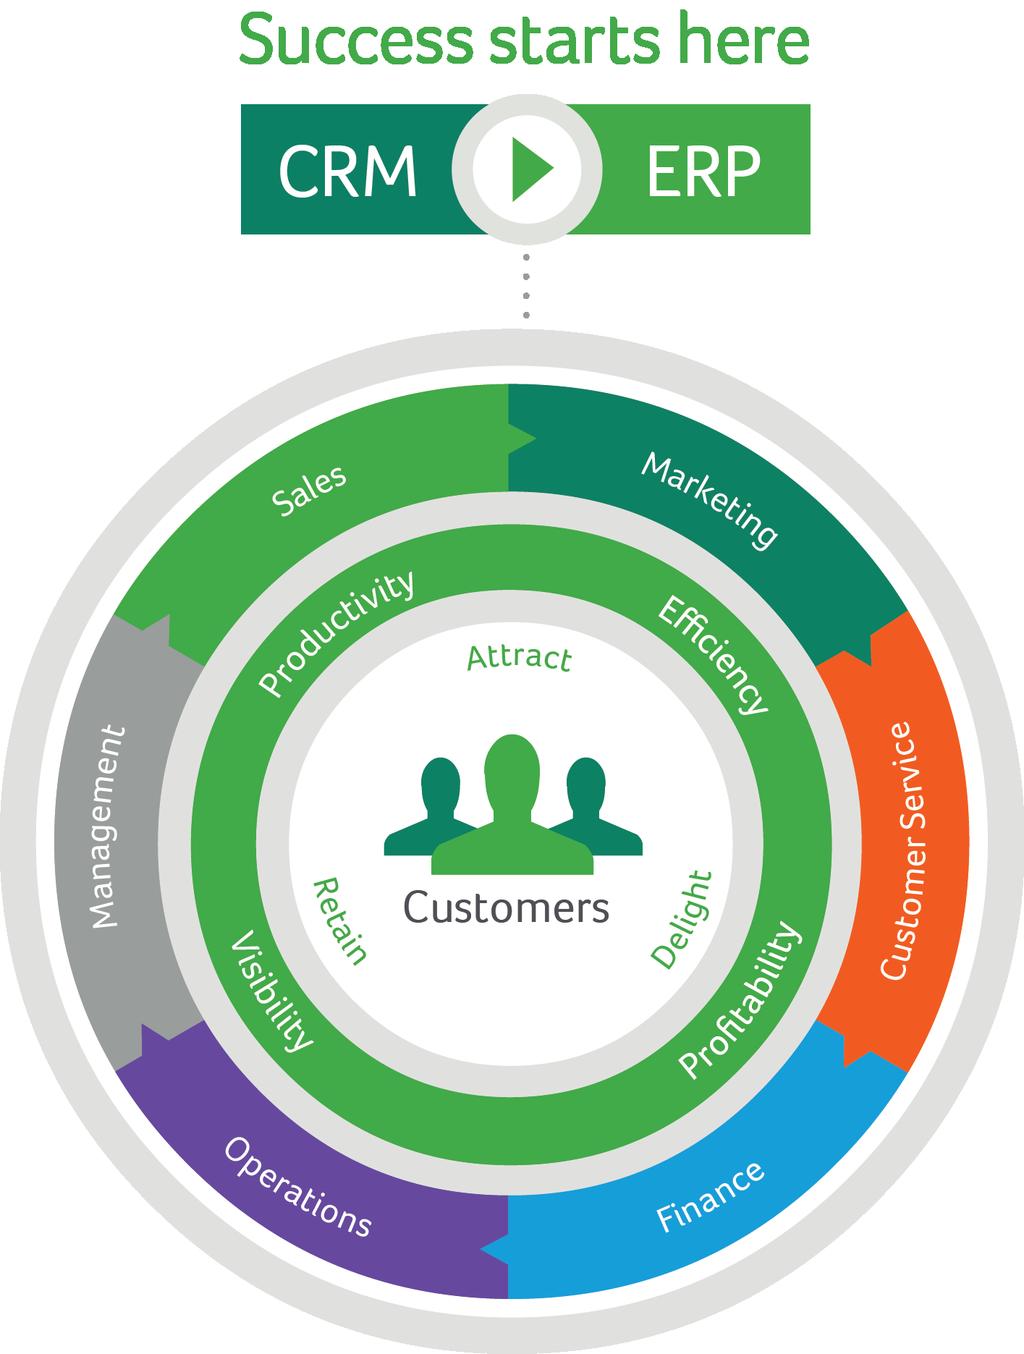 Sage CRM and Sage ERP Using Sage CRM combined with Sage ERP, you can enjoy better business insight, greater efficiencies, increased productivity, and a single, customer-centric view across your